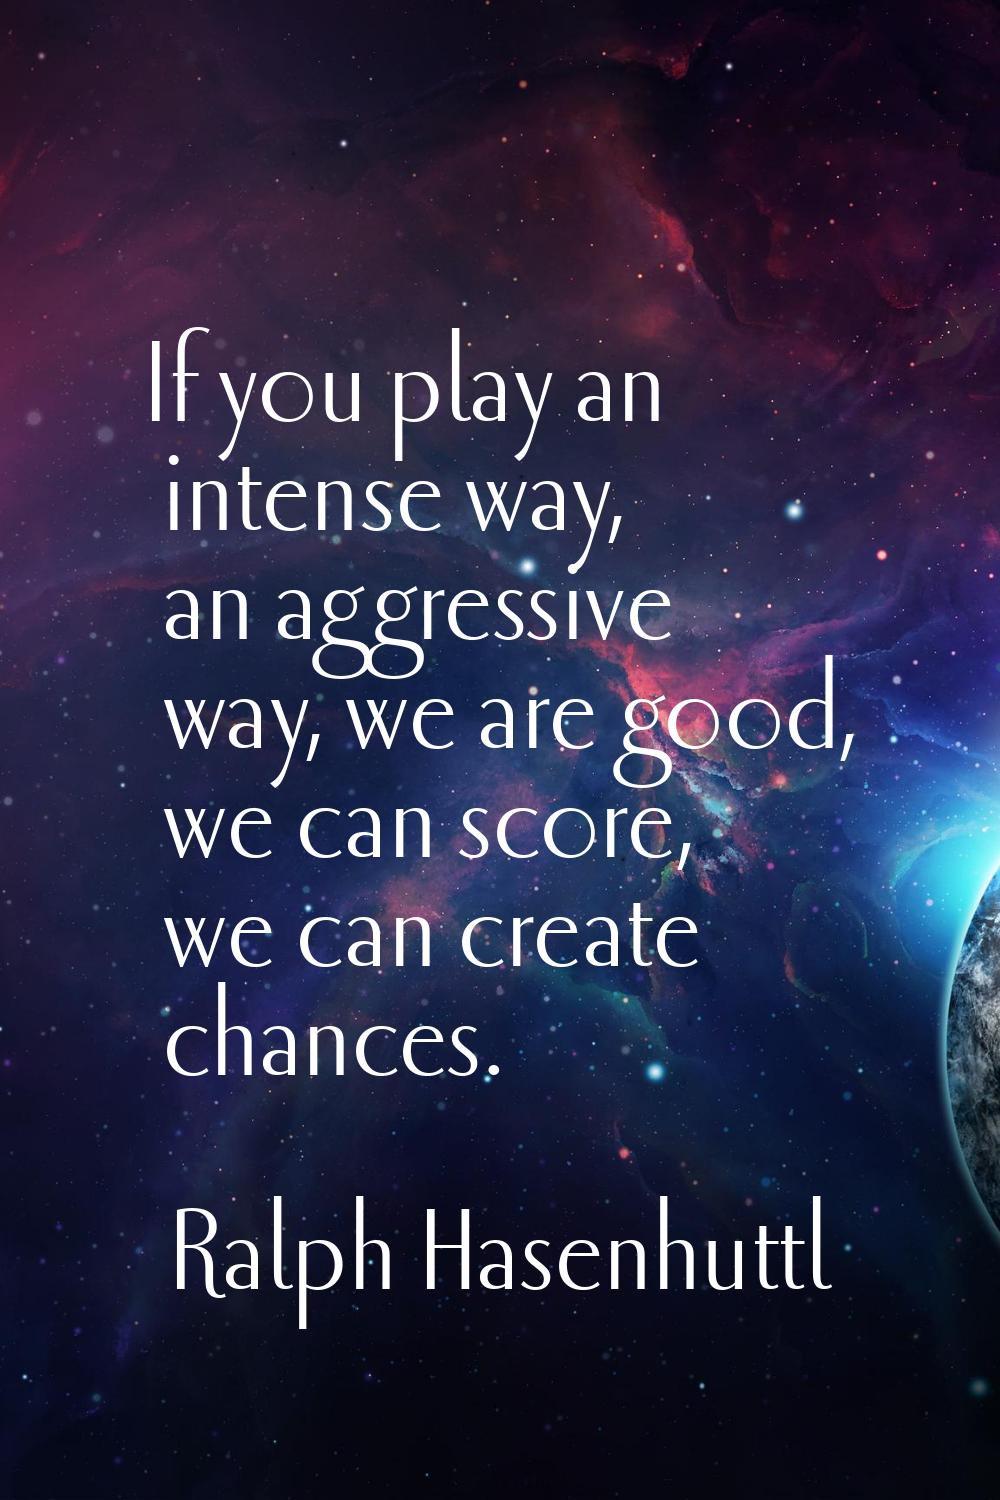 If you play an intense way, an aggressive way, we are good, we can score, we can create chances.